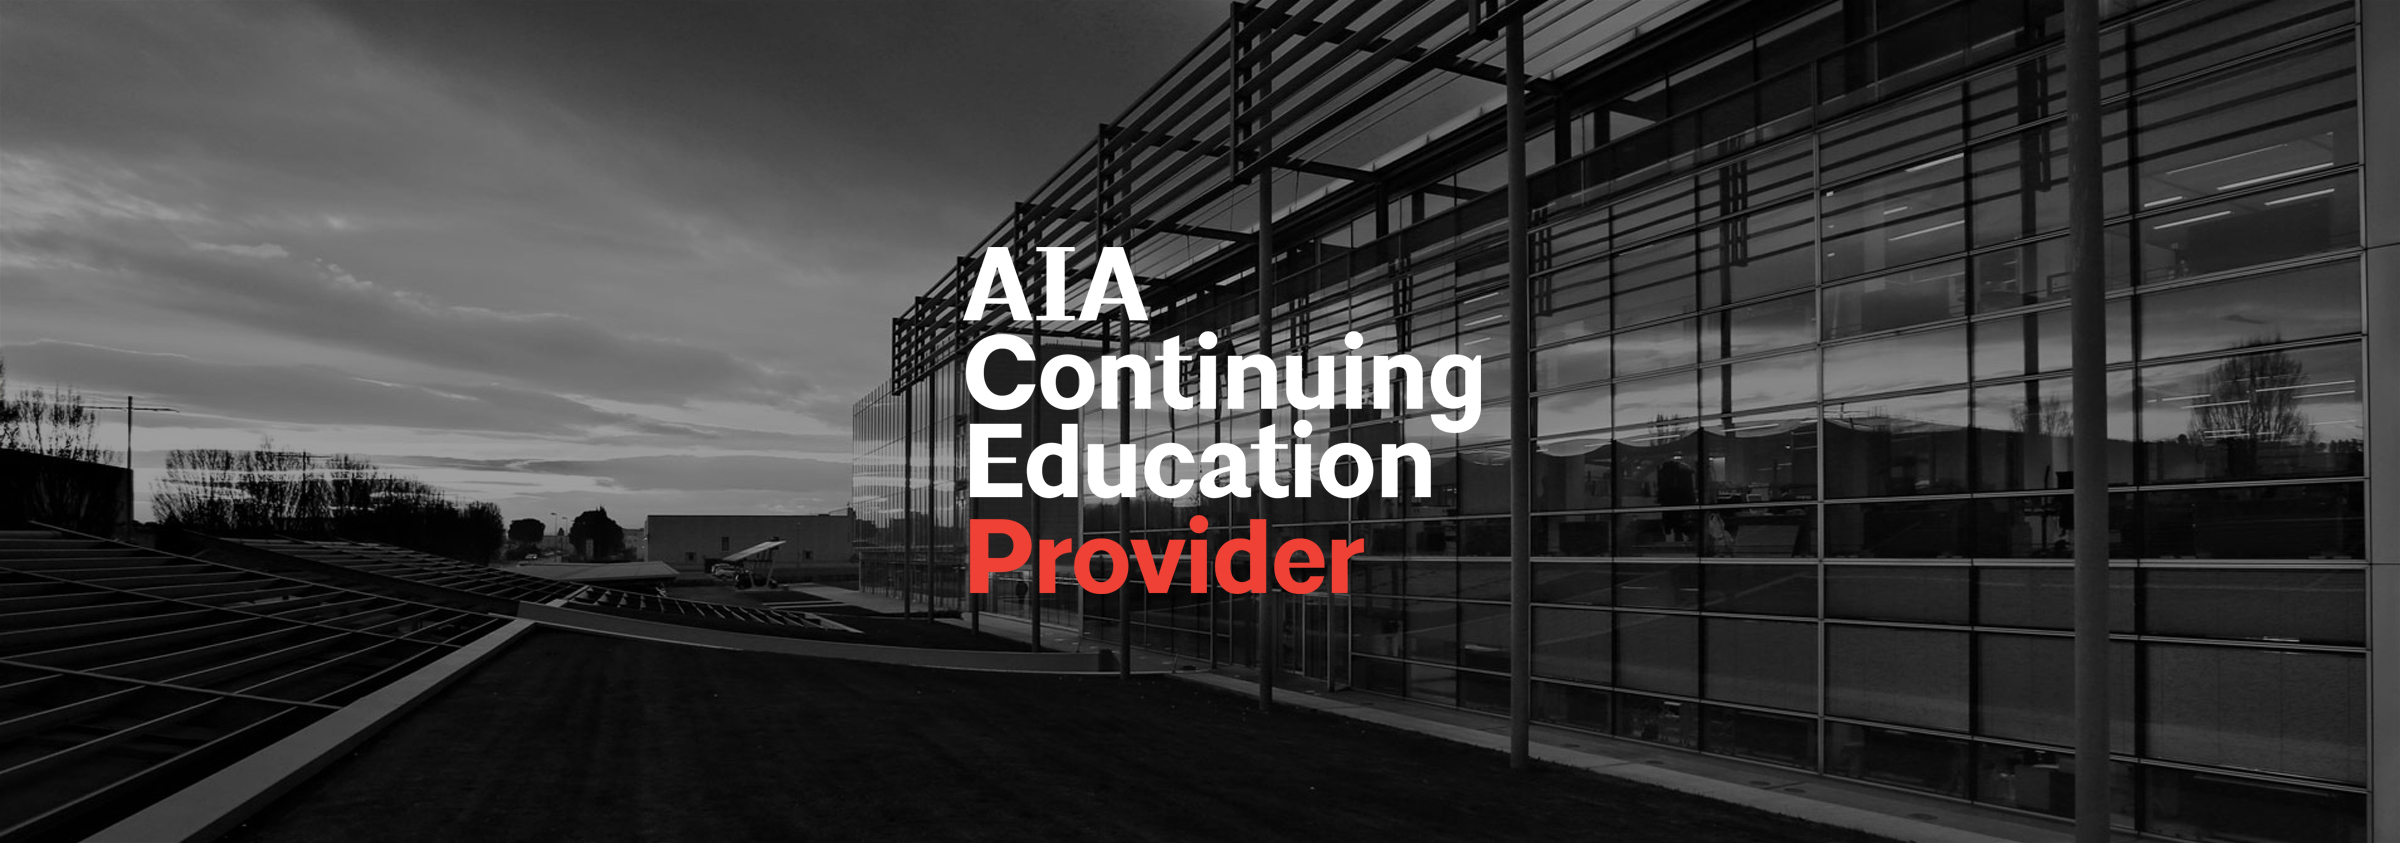 AIA Continuous Education Provider